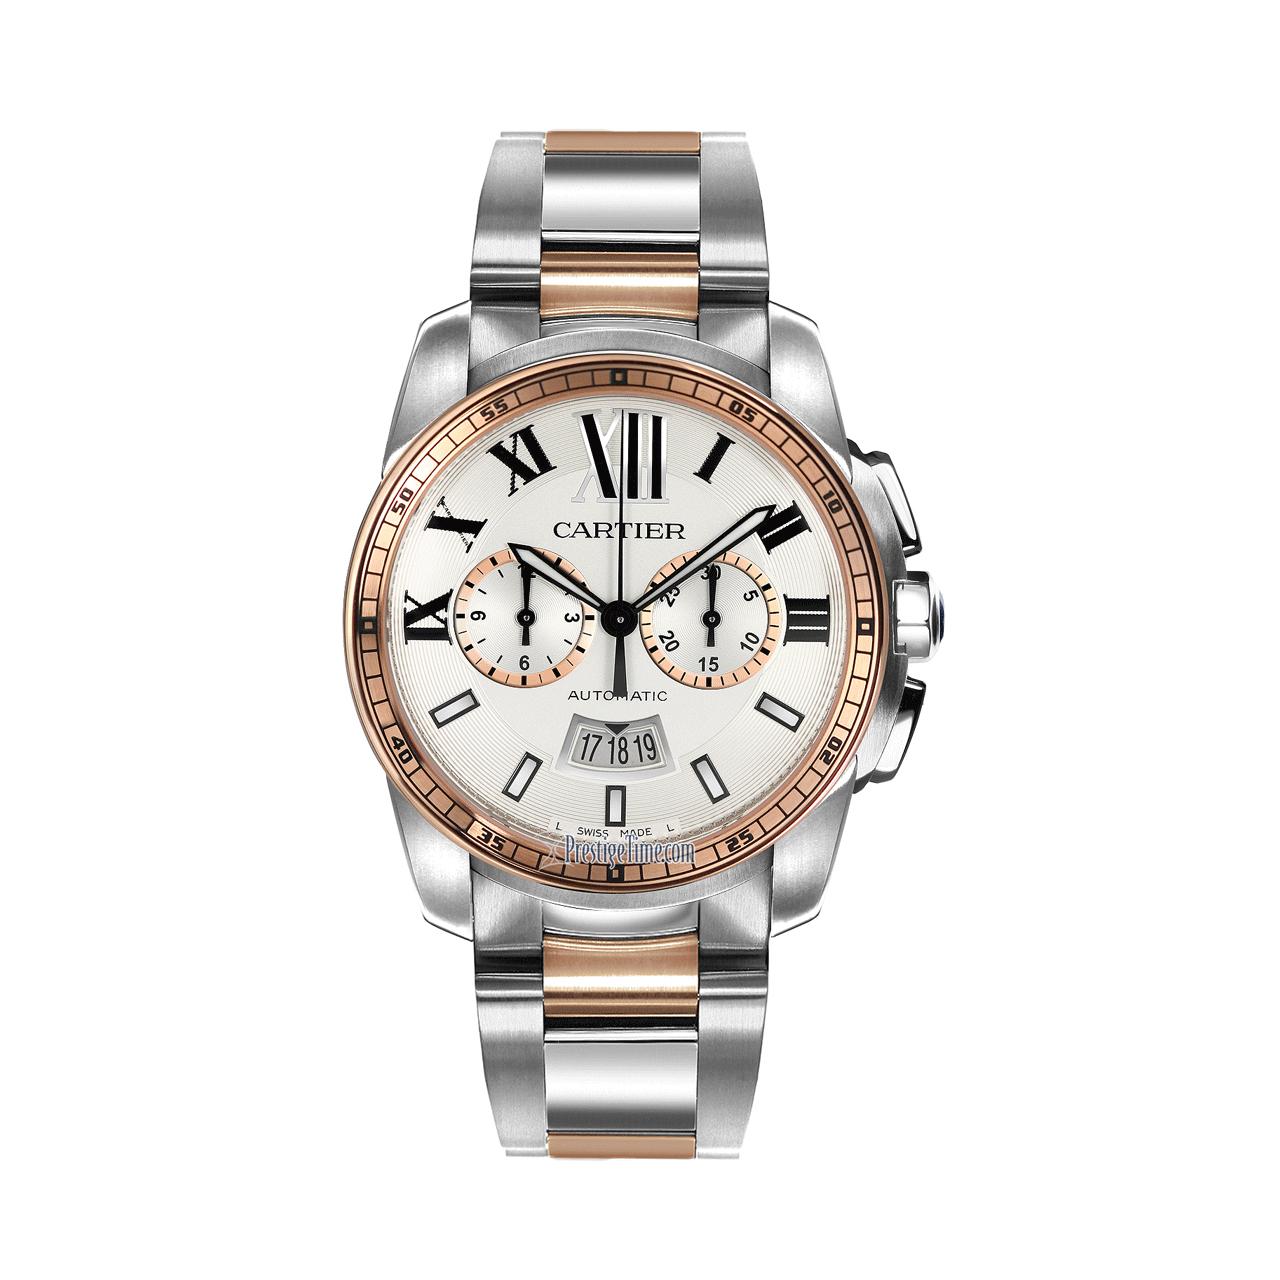 Pre-owned Calibre de Cartier watch model W7100042. 42mm stainless steel round case with stainless steel and 18k rose gold bracelet. Silver dial with luminous hands and roman numeral. Fixed 18k rose gold bezel. Automatic movement. Skeleton case back.